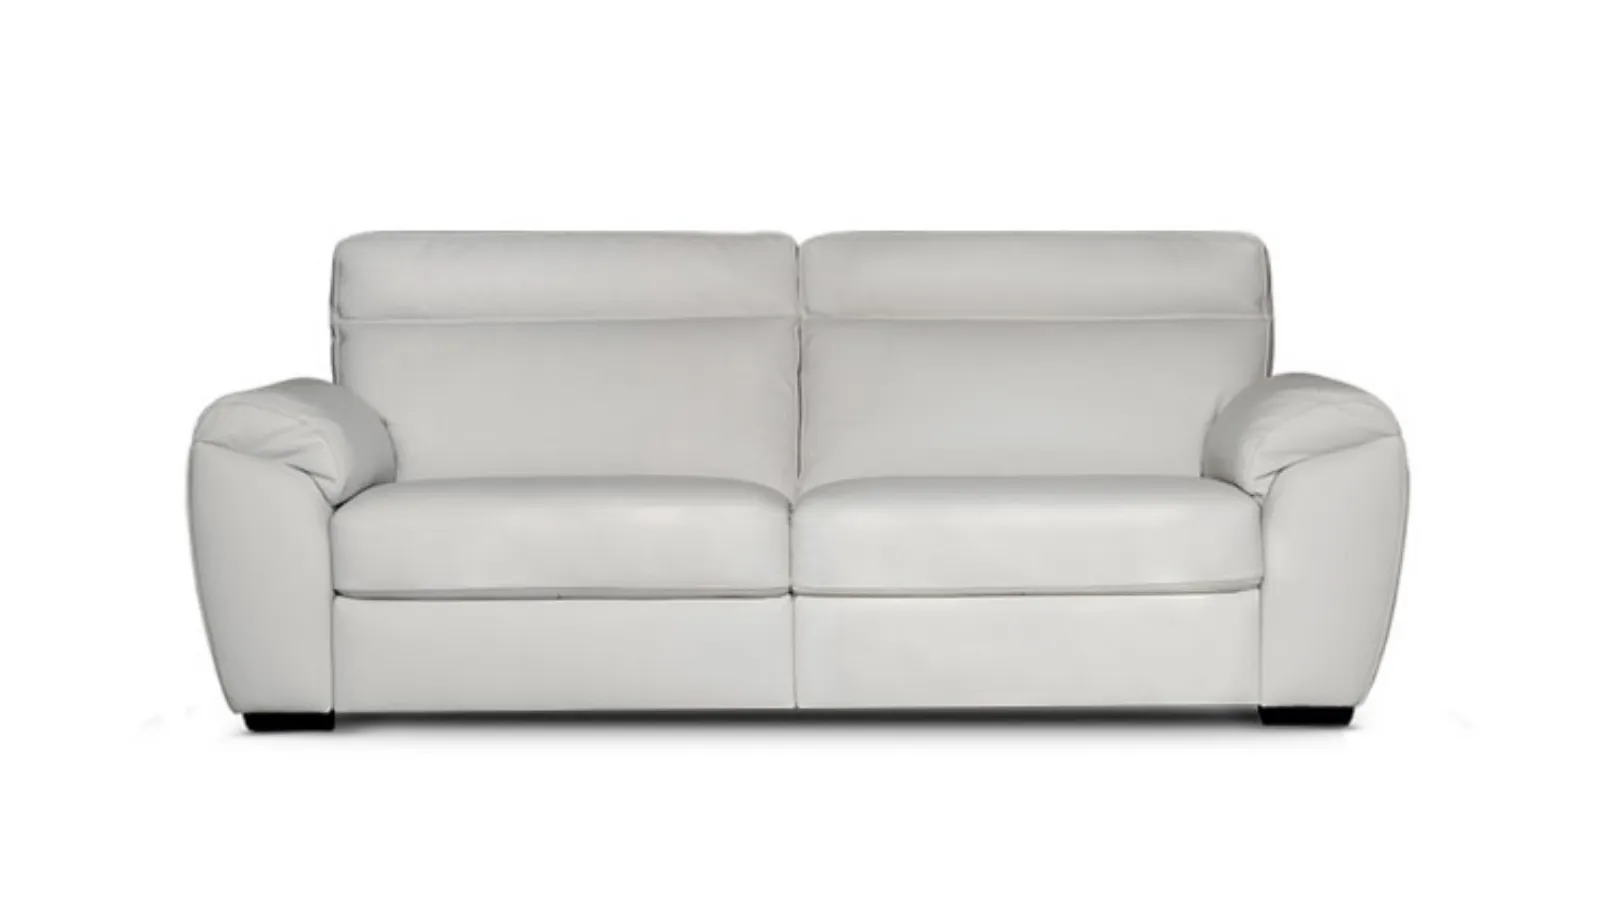 modular leather sofa with relaxation Charles